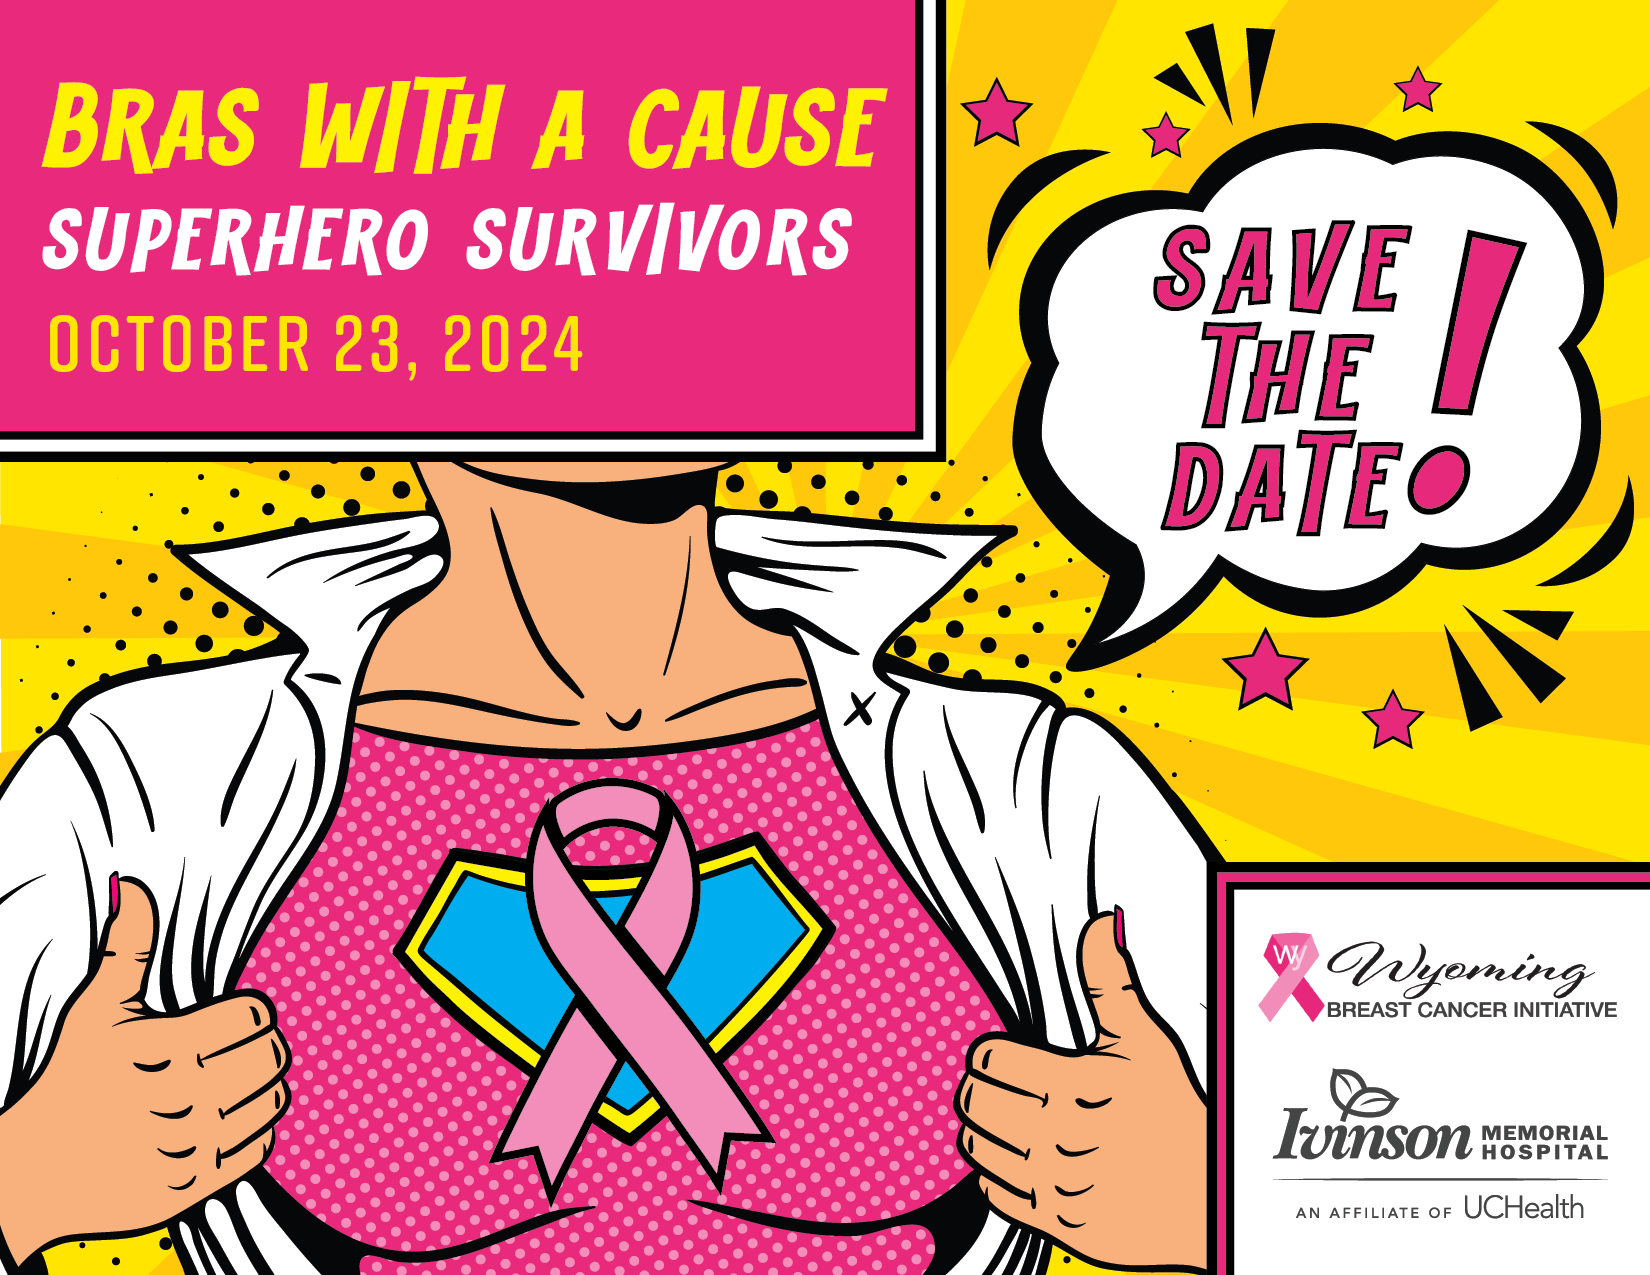 Bras with a Cause